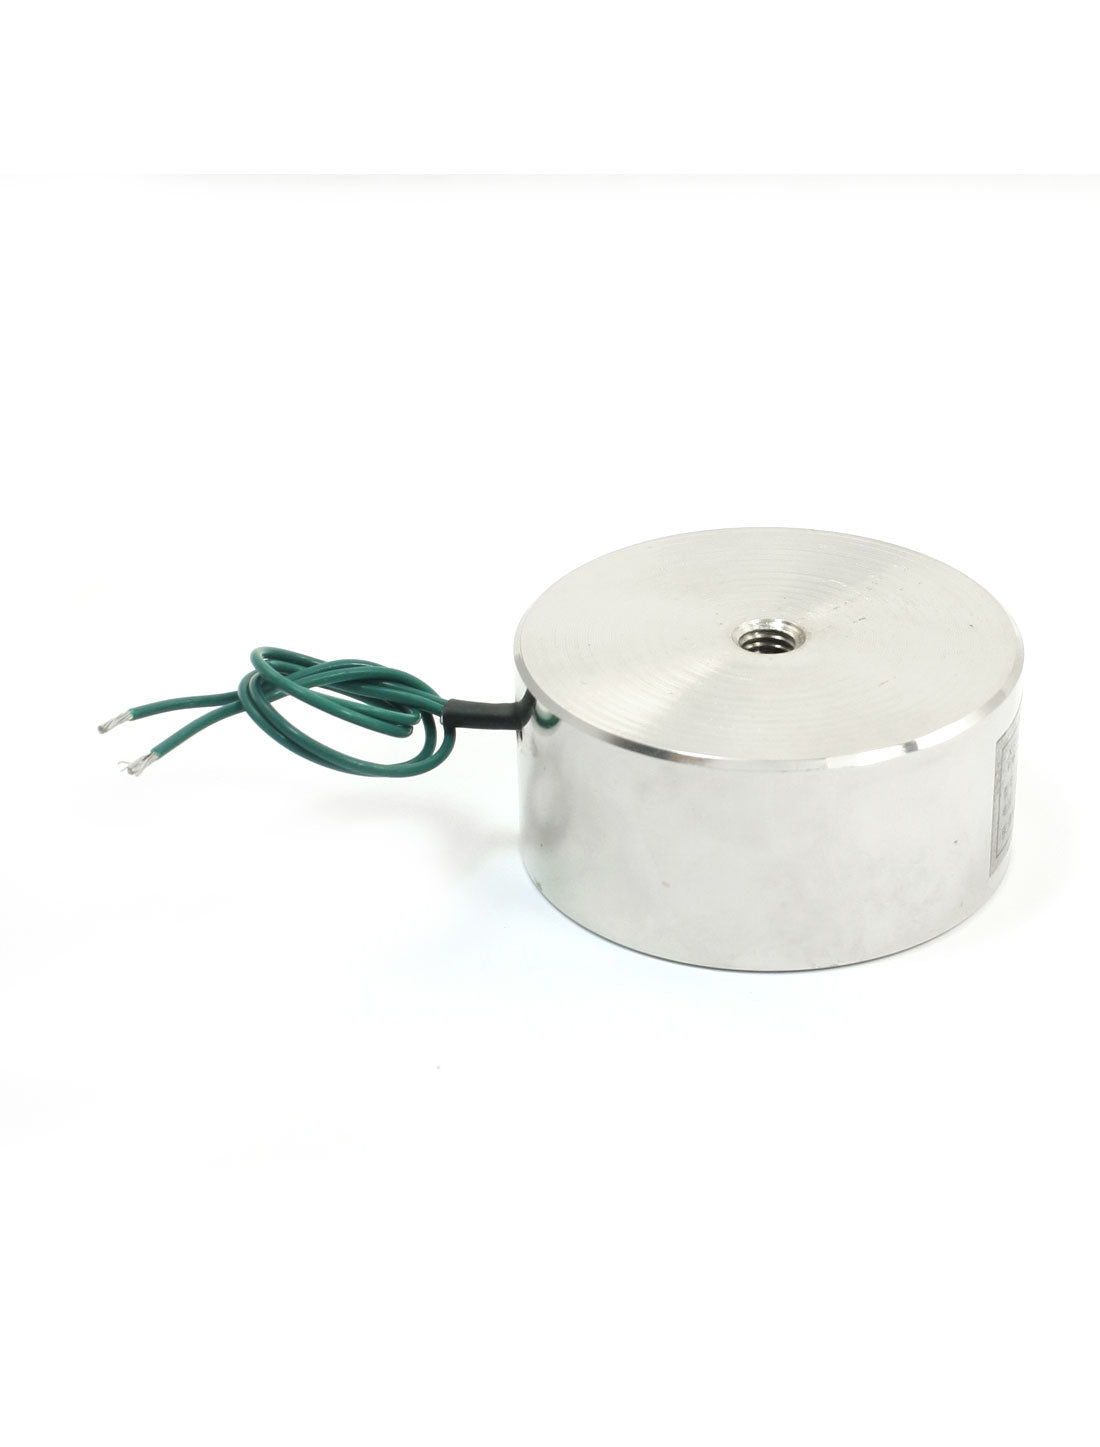 uxcell Uxcell 80Kg/176Lb 20cm Two Wires 8mm Thread Dia Holding Electromagnet Solenoid 65x30mm DC12V 0.6A